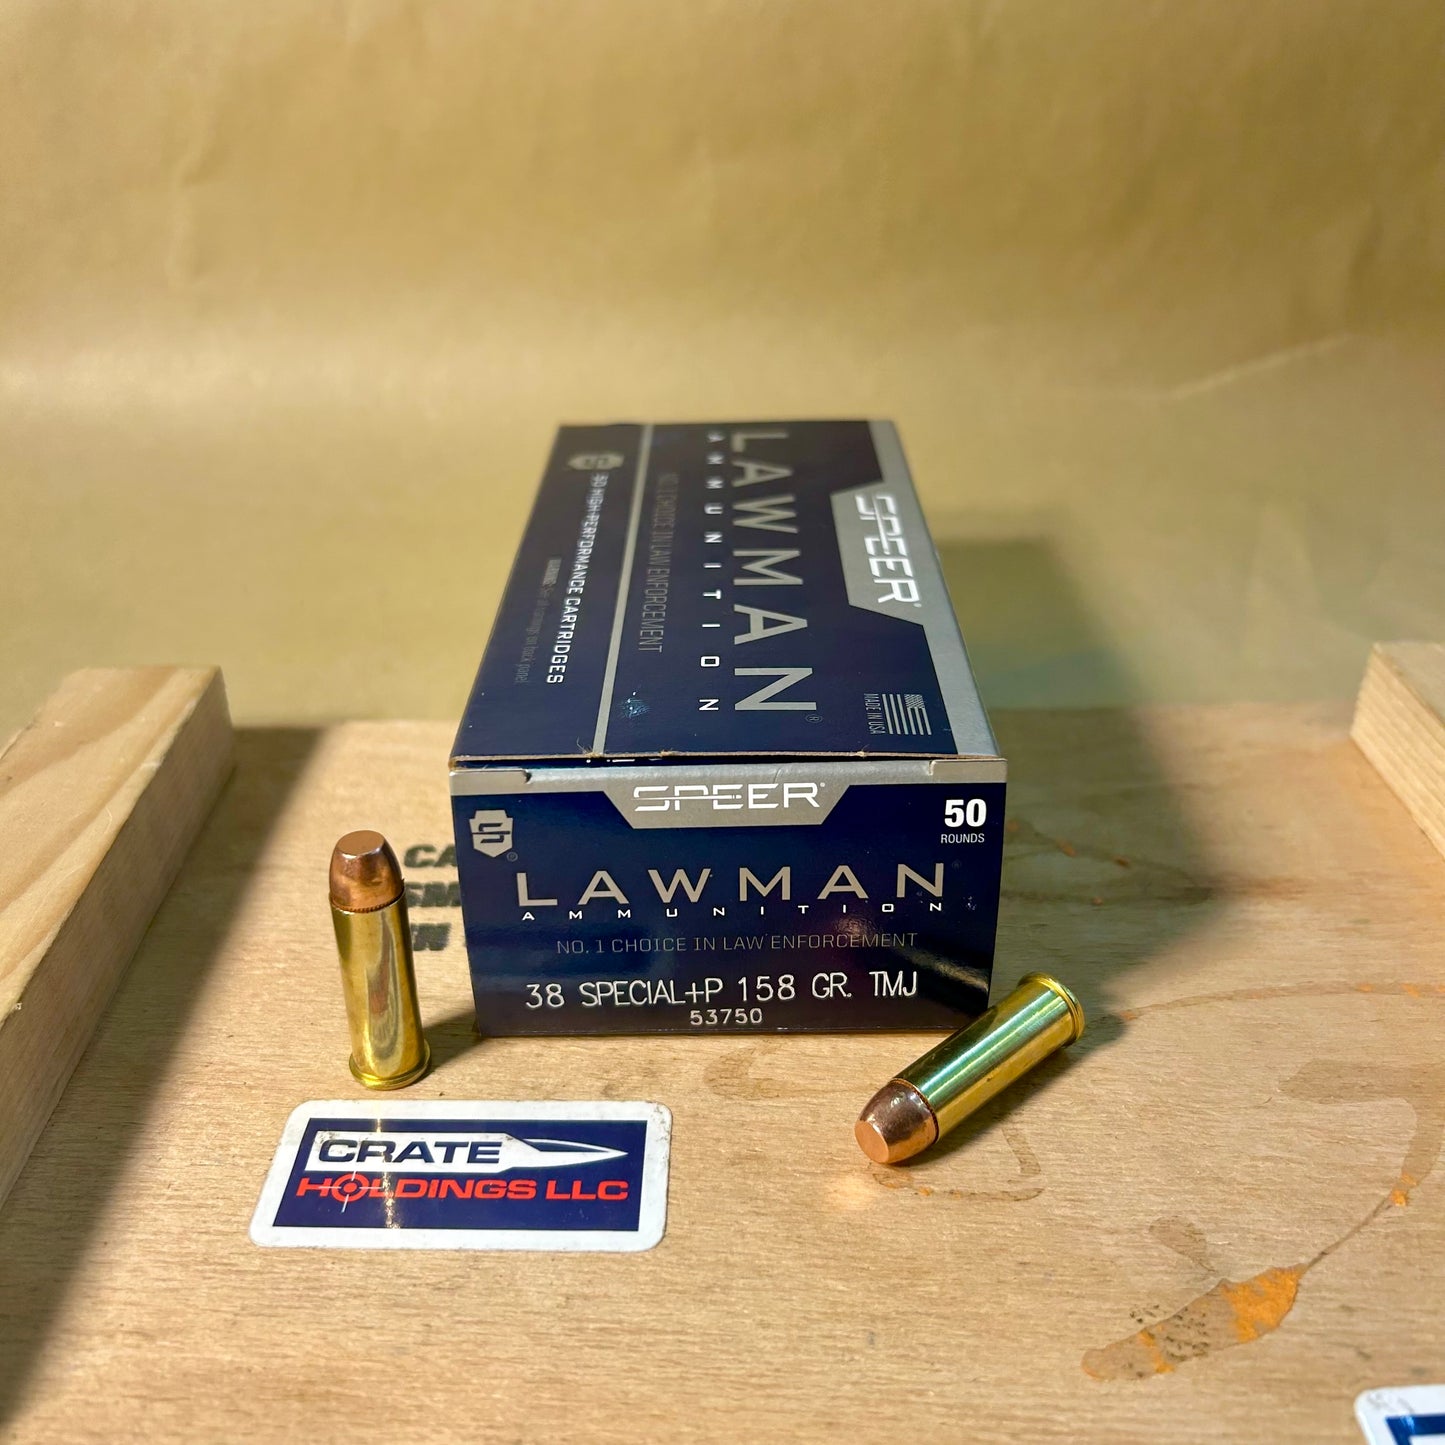 Free Shipping - 1000 Round Case Speer Lawman 38 Special +P Ammo 158gr TMJ - 53750